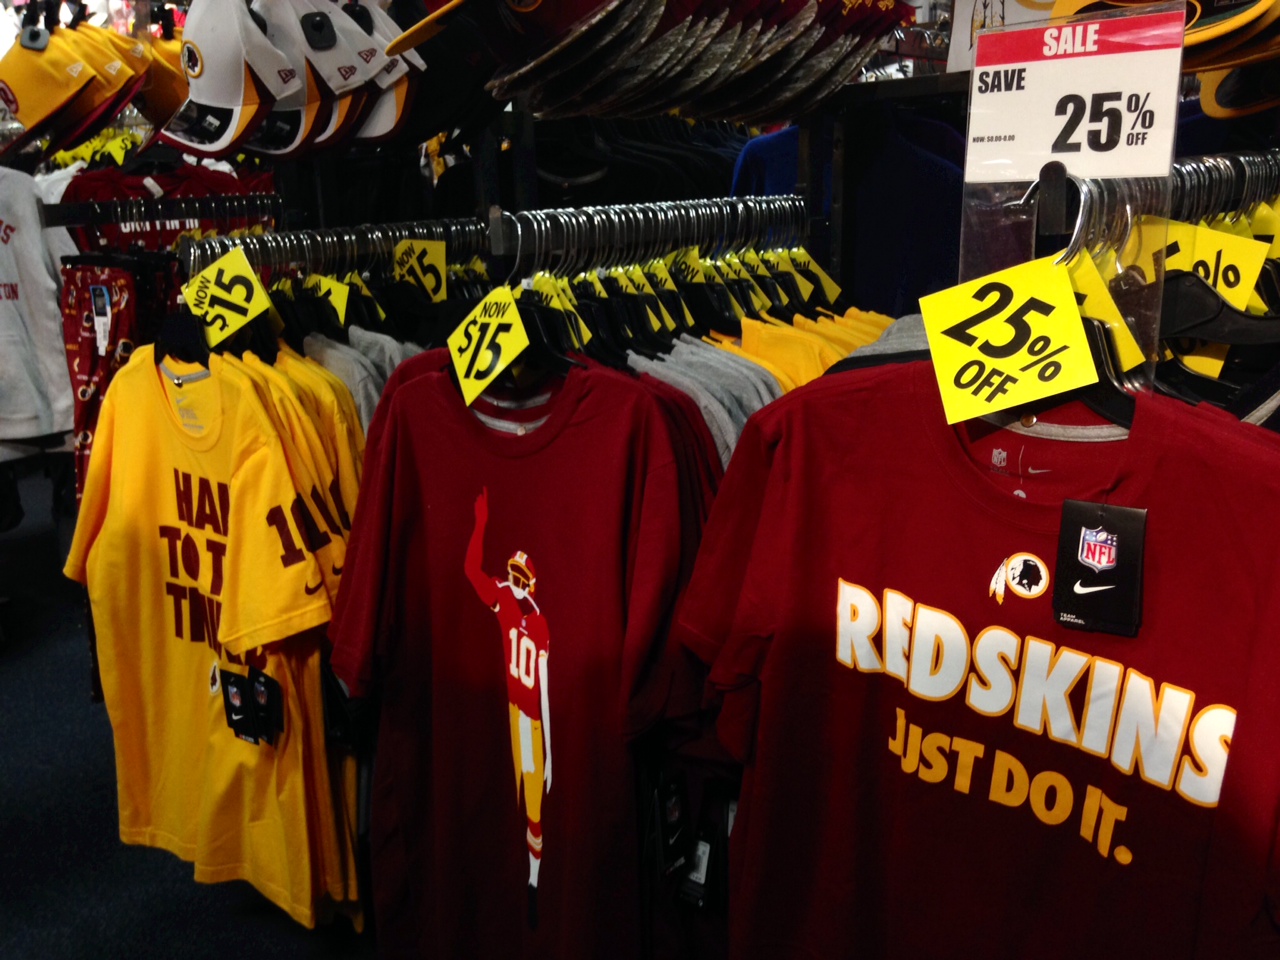 Redskins fans freeze out local retailers